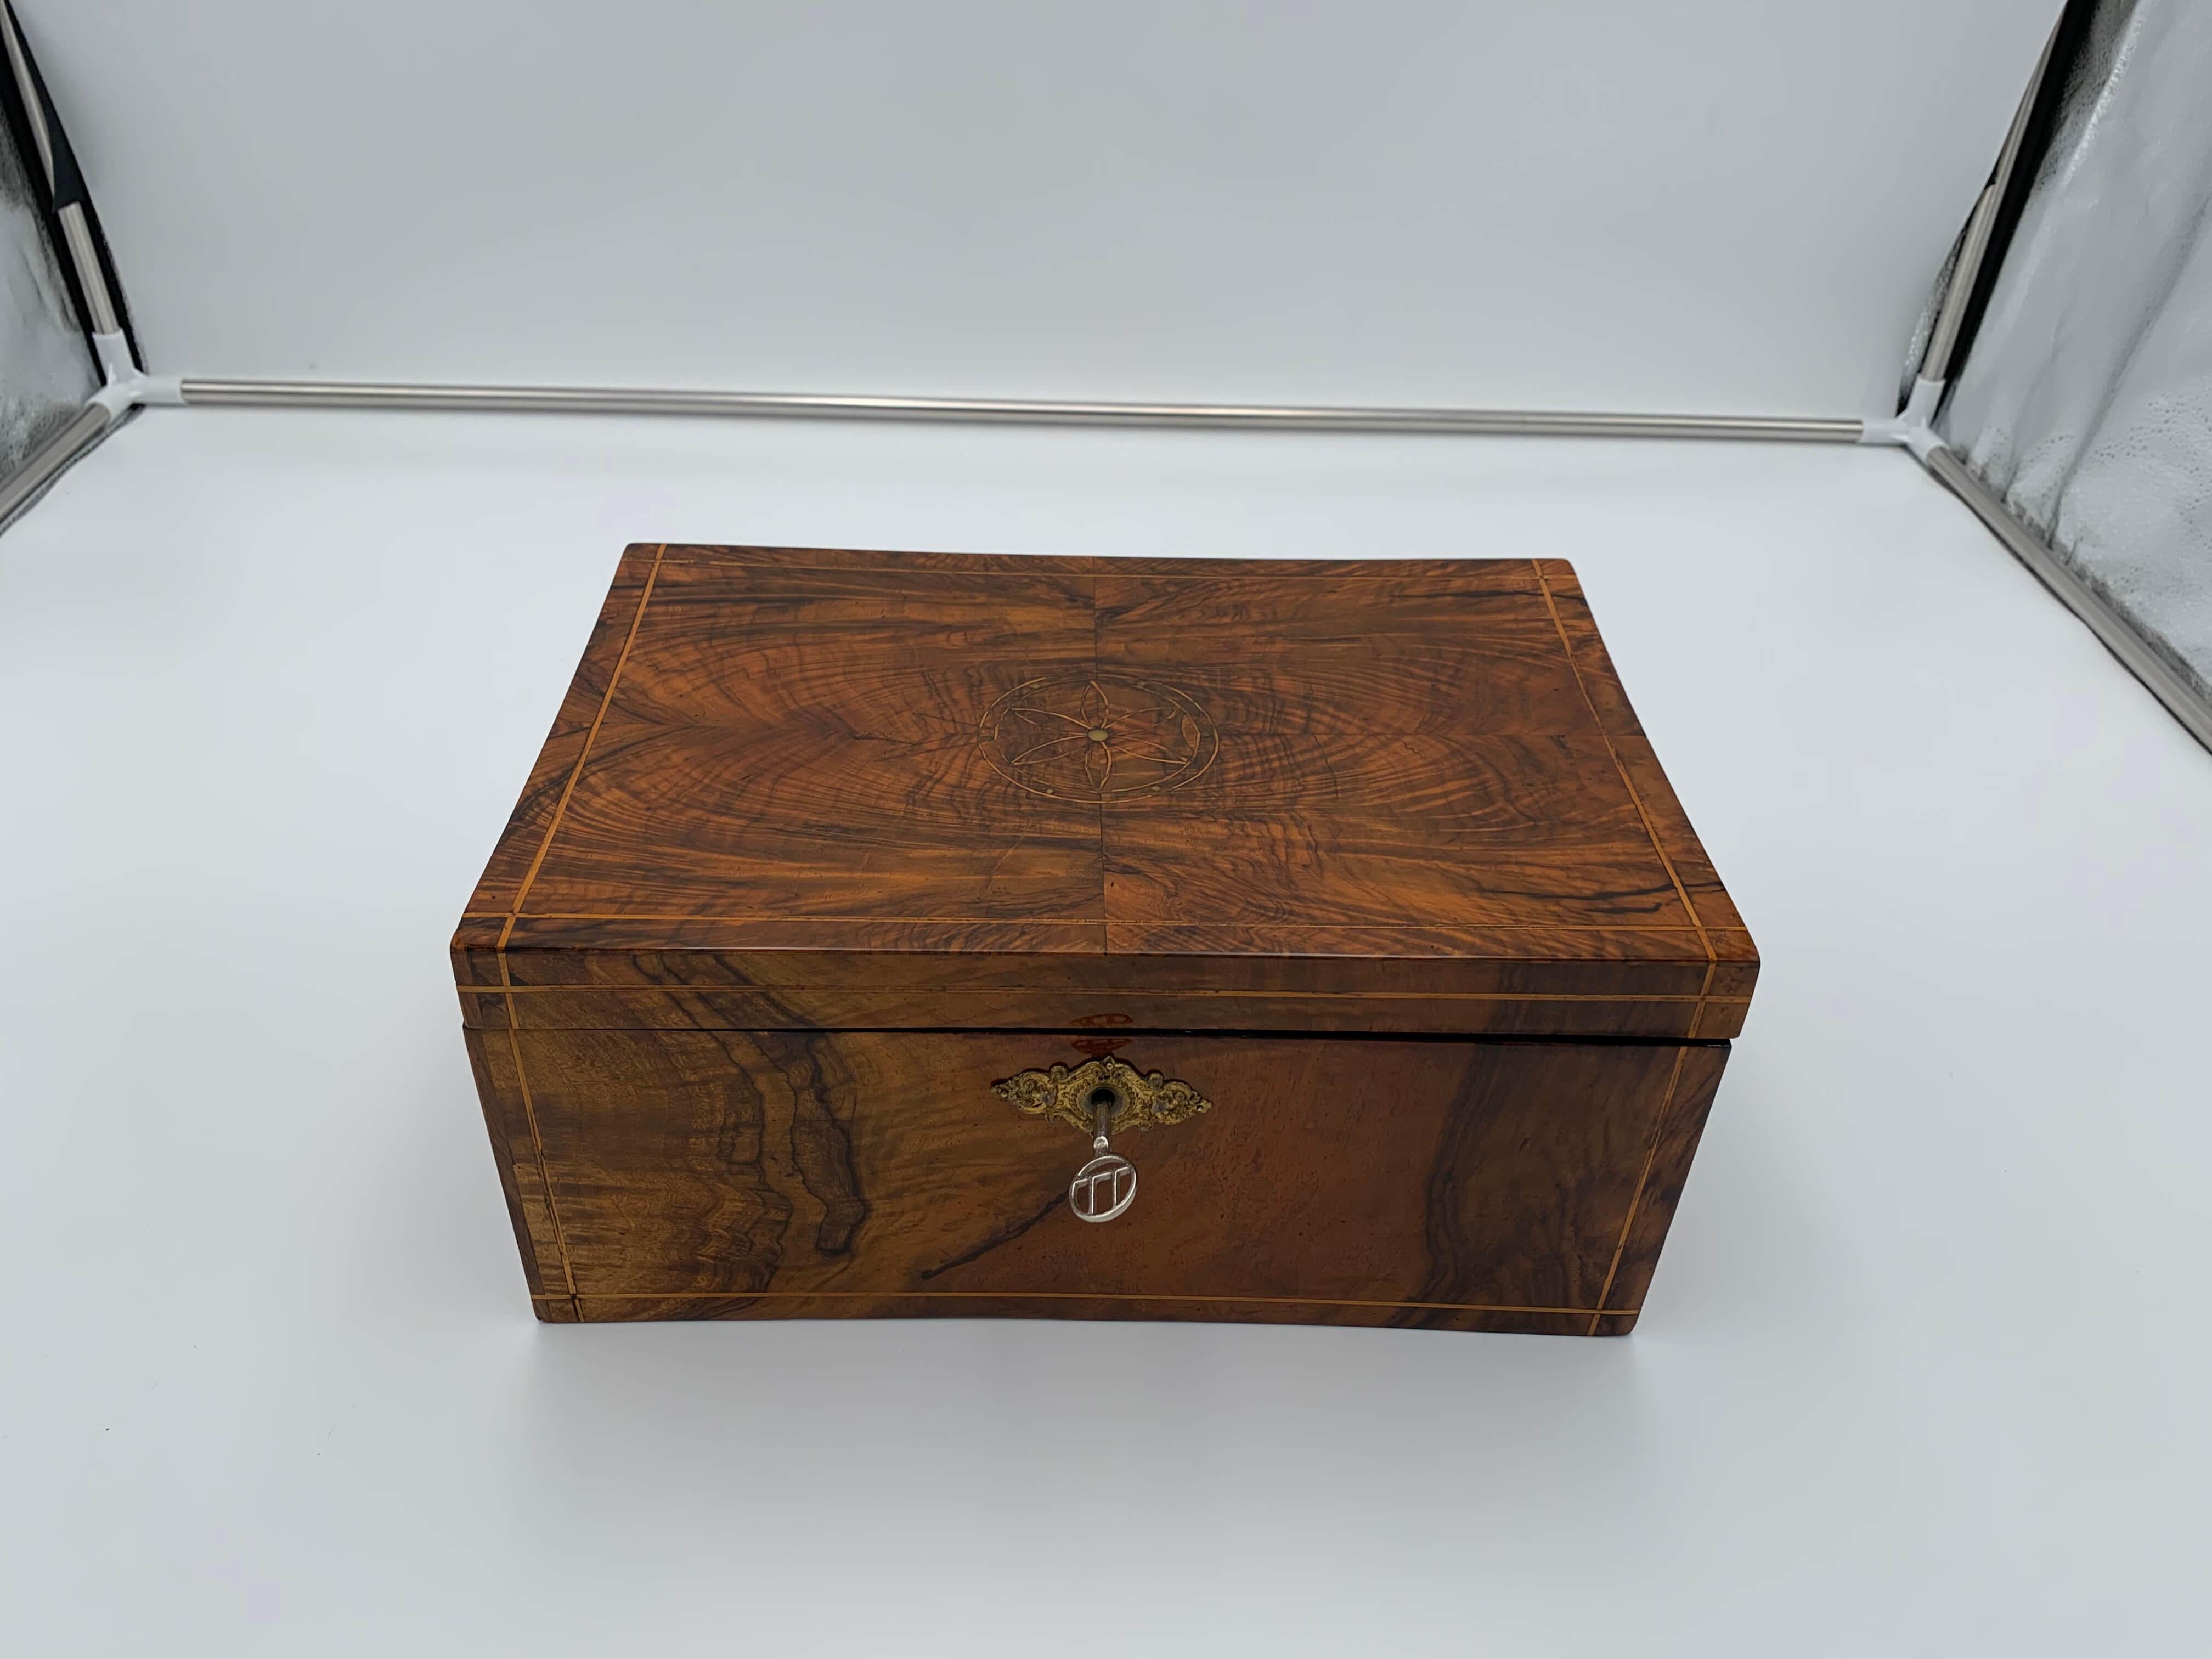 Restored neoclassical Biedermeier Box, Walnut Veneer, Maple Inlays, South Germany circa 1830

Walnut veneered with maple inlays. Trim band vertical and horizontal around the edges and flower shaped circle form in the middle of the top. Small dots